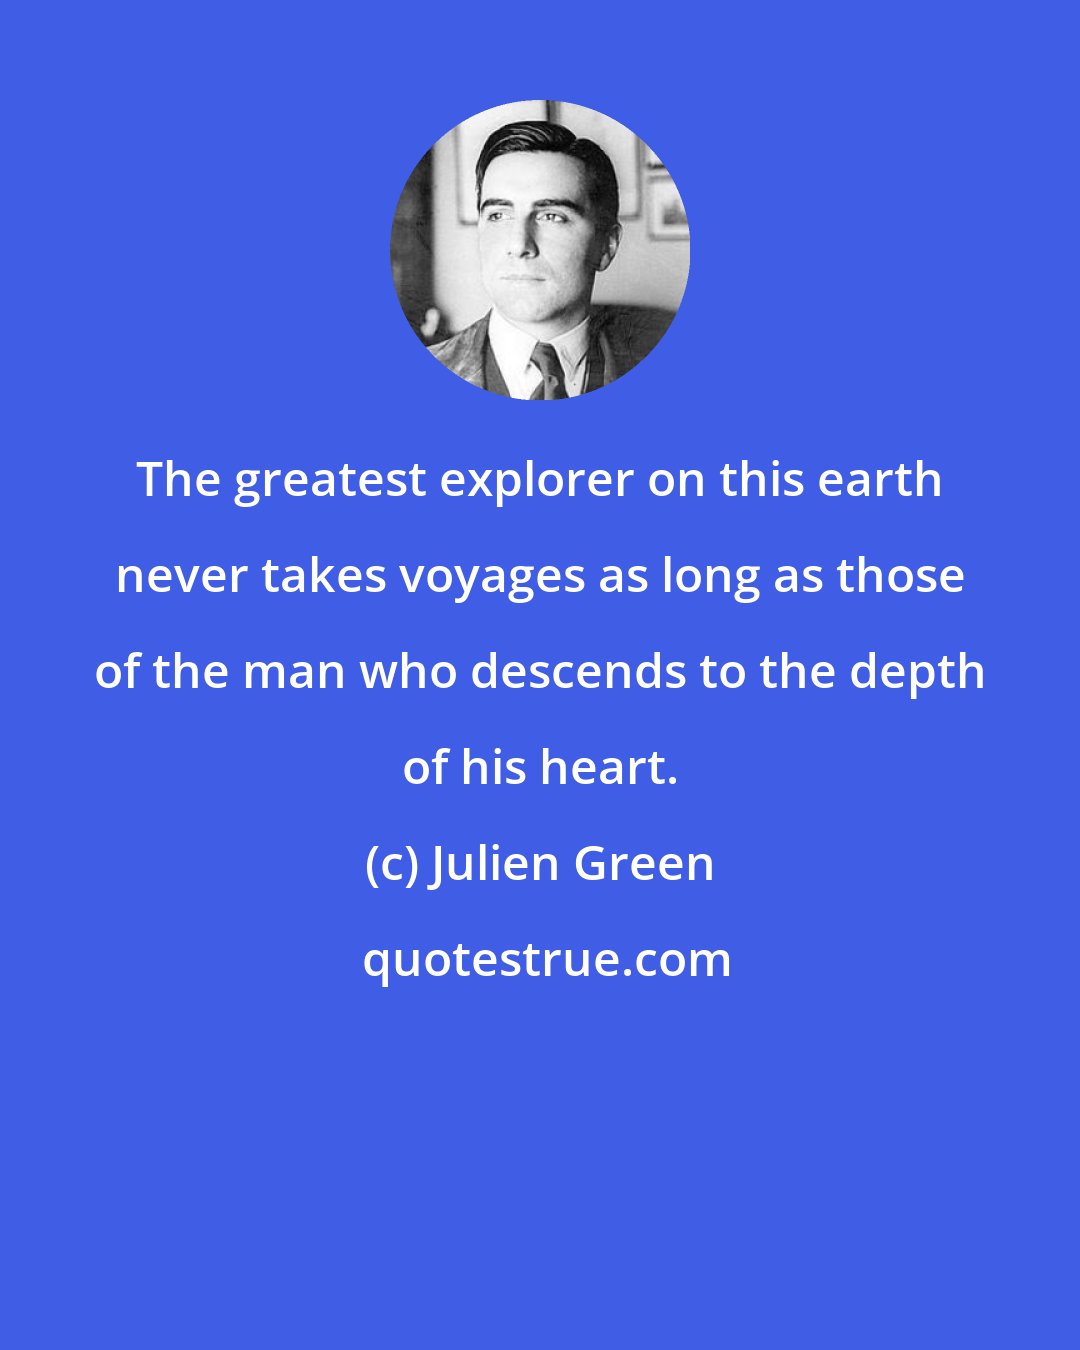 Julien Green: The greatest explorer on this earth never takes voyages as long as those of the man who descends to the depth of his heart.